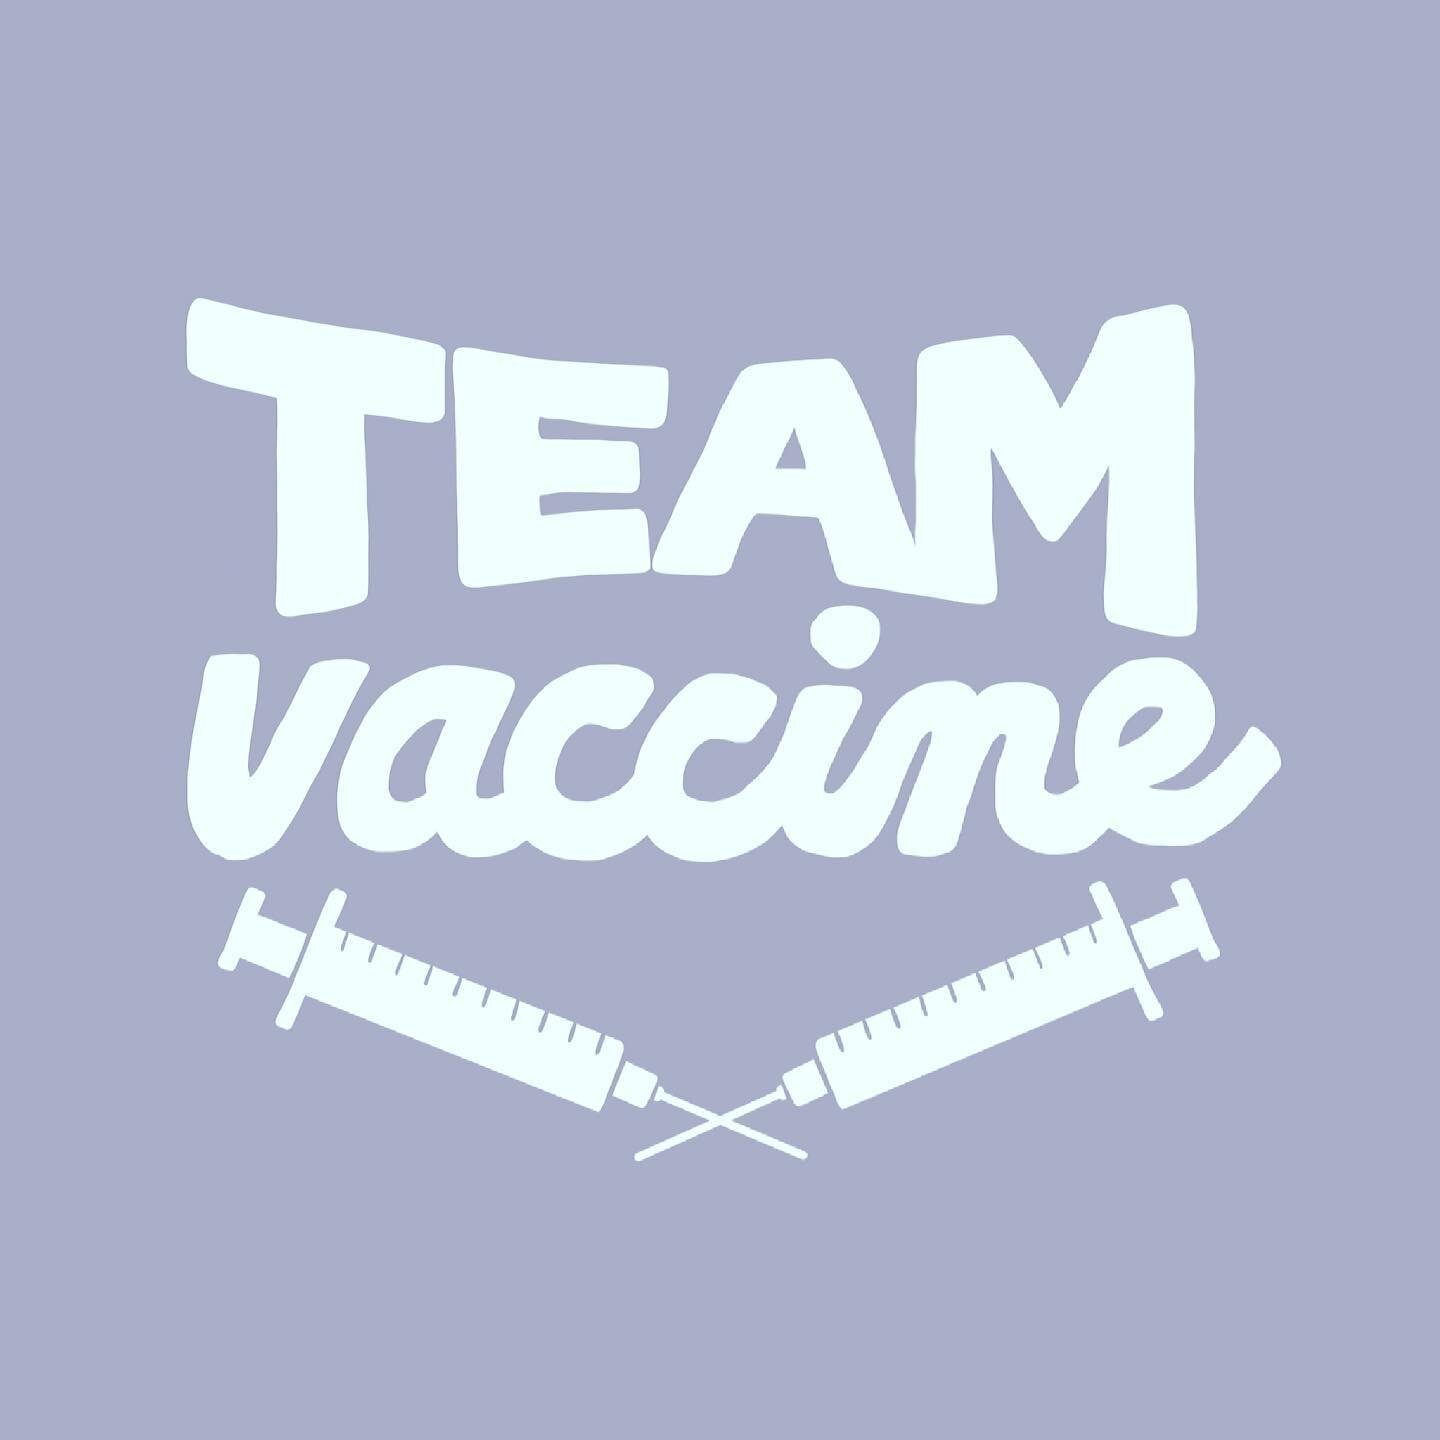 New sticker in the works!
.
.
.
.
.
#thecuriotable #proscience #scienceliteracy #vaccinessavelives #teamvaccine #sciencesaveslives